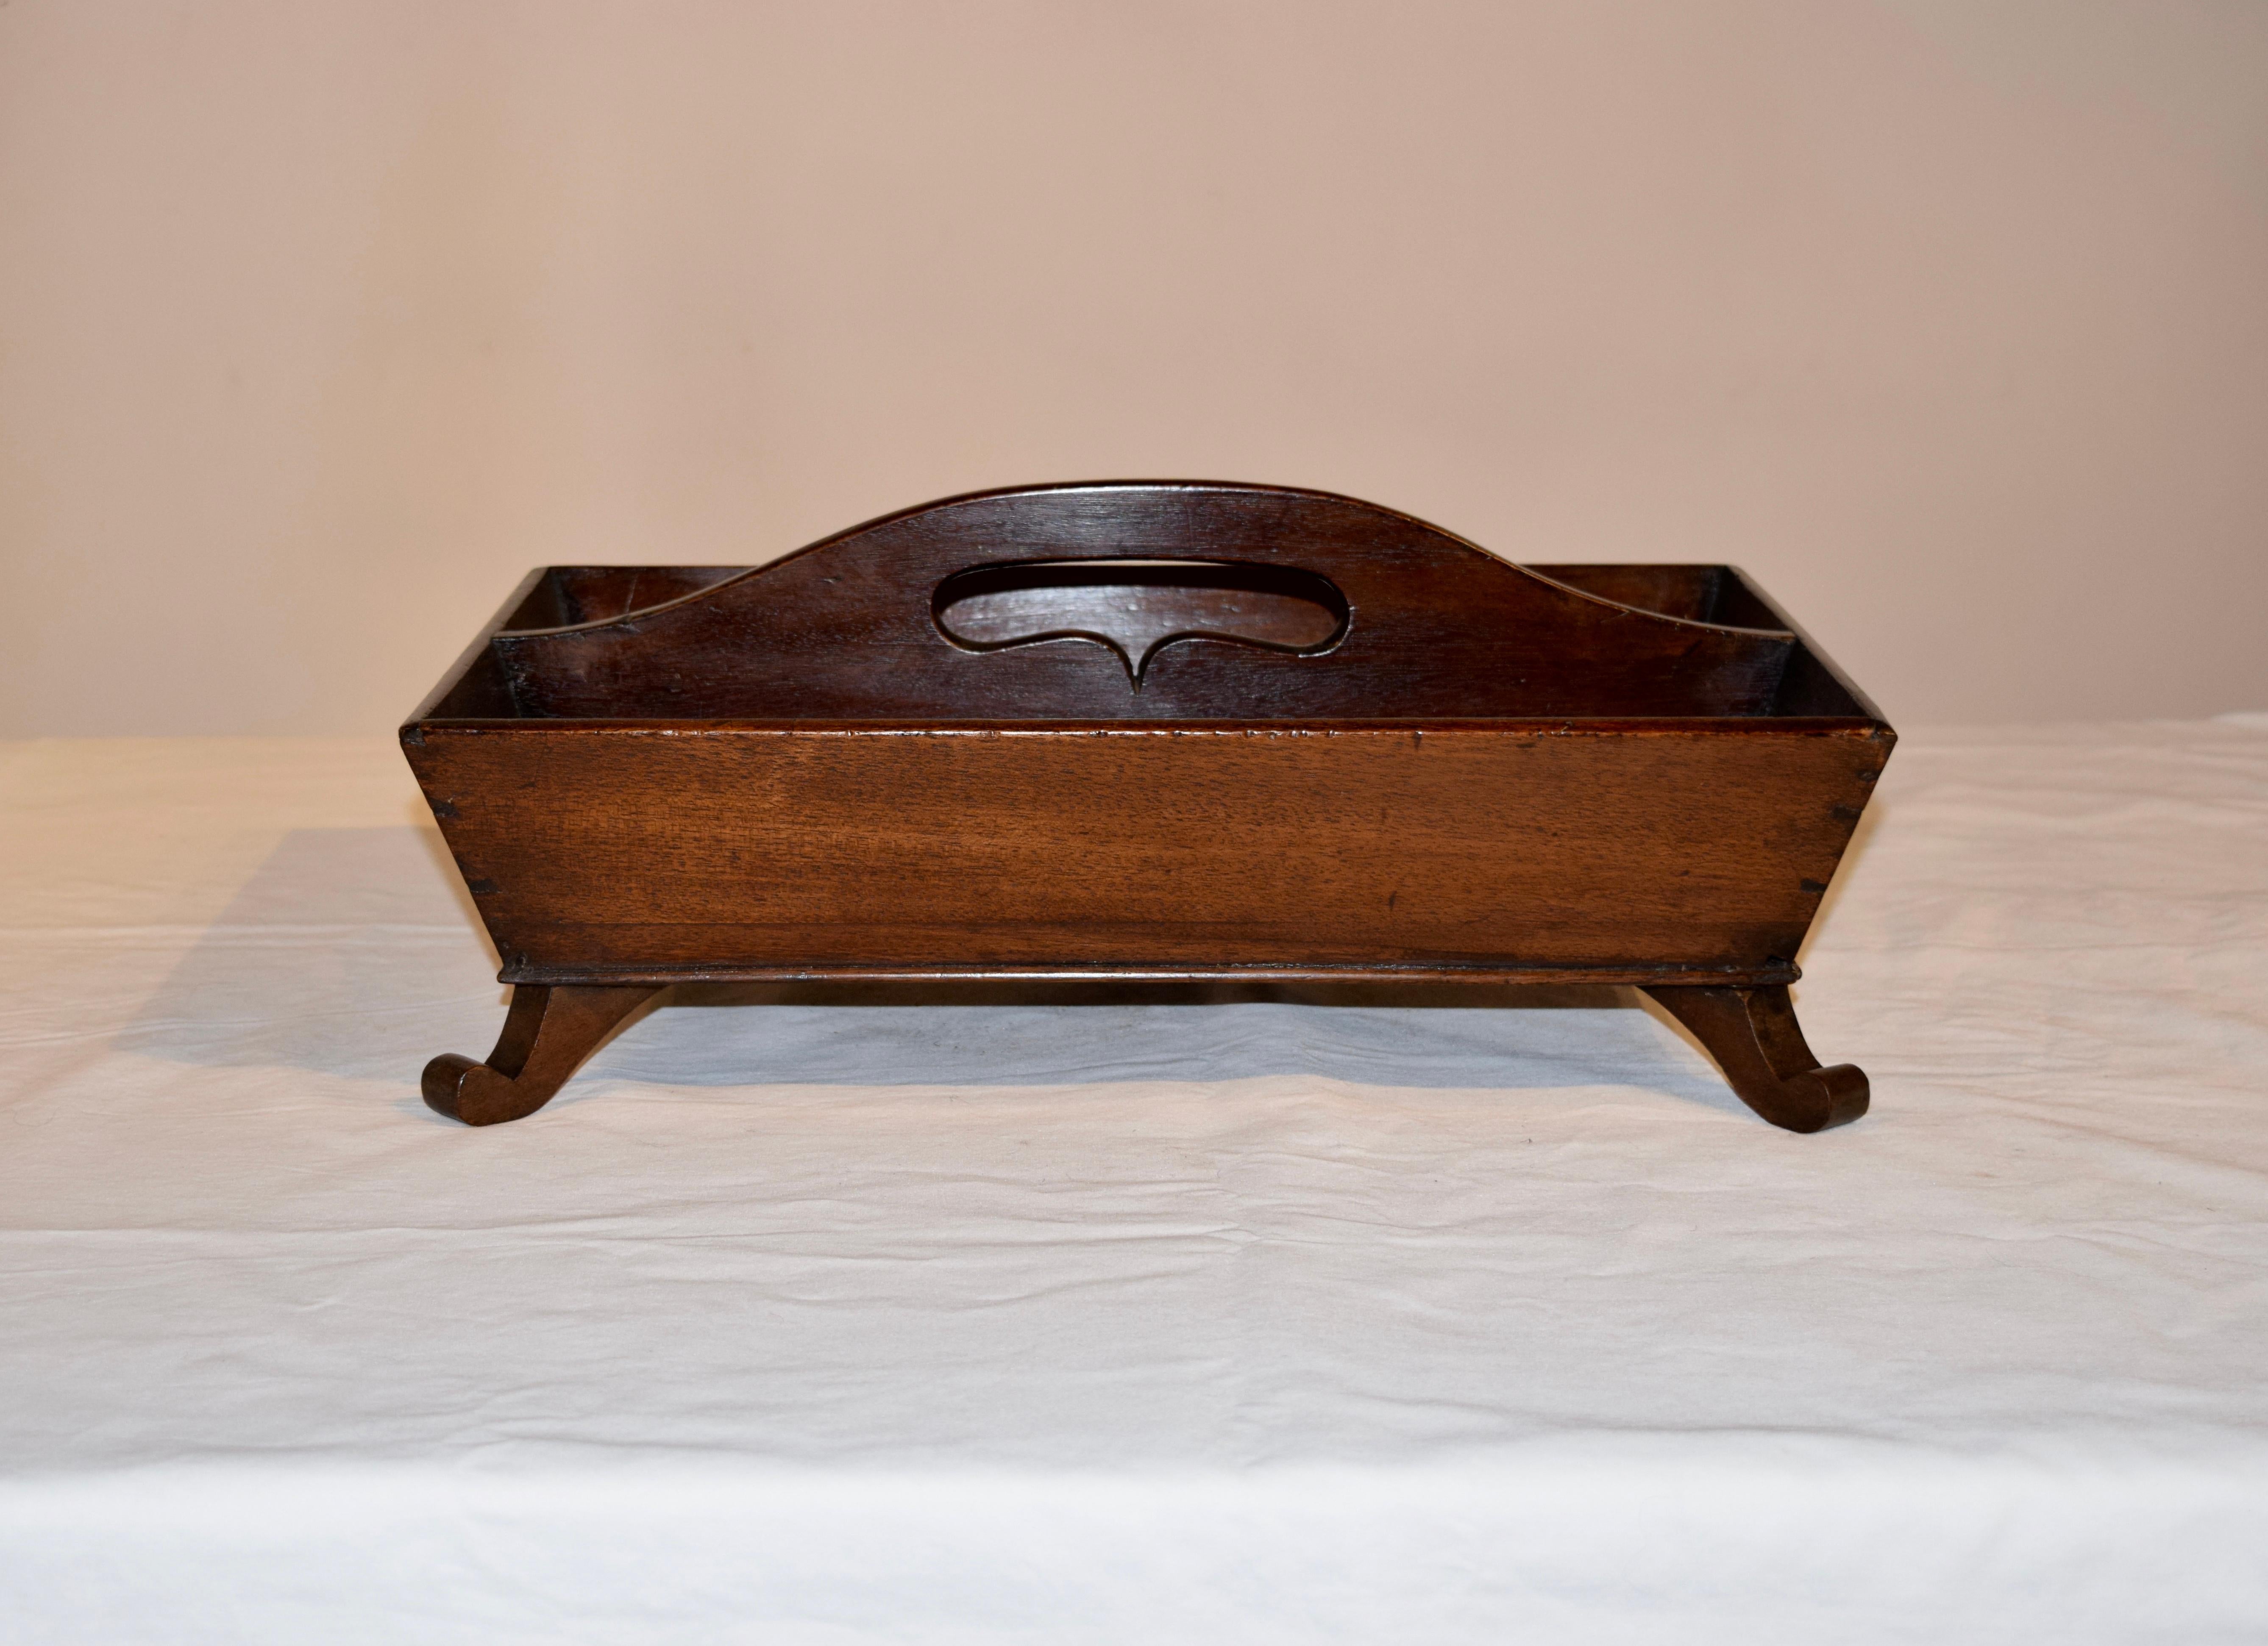 19th century English mahogany cutlery tray with a shaped handle on the top and splayed sides, supported on hand carved feet.